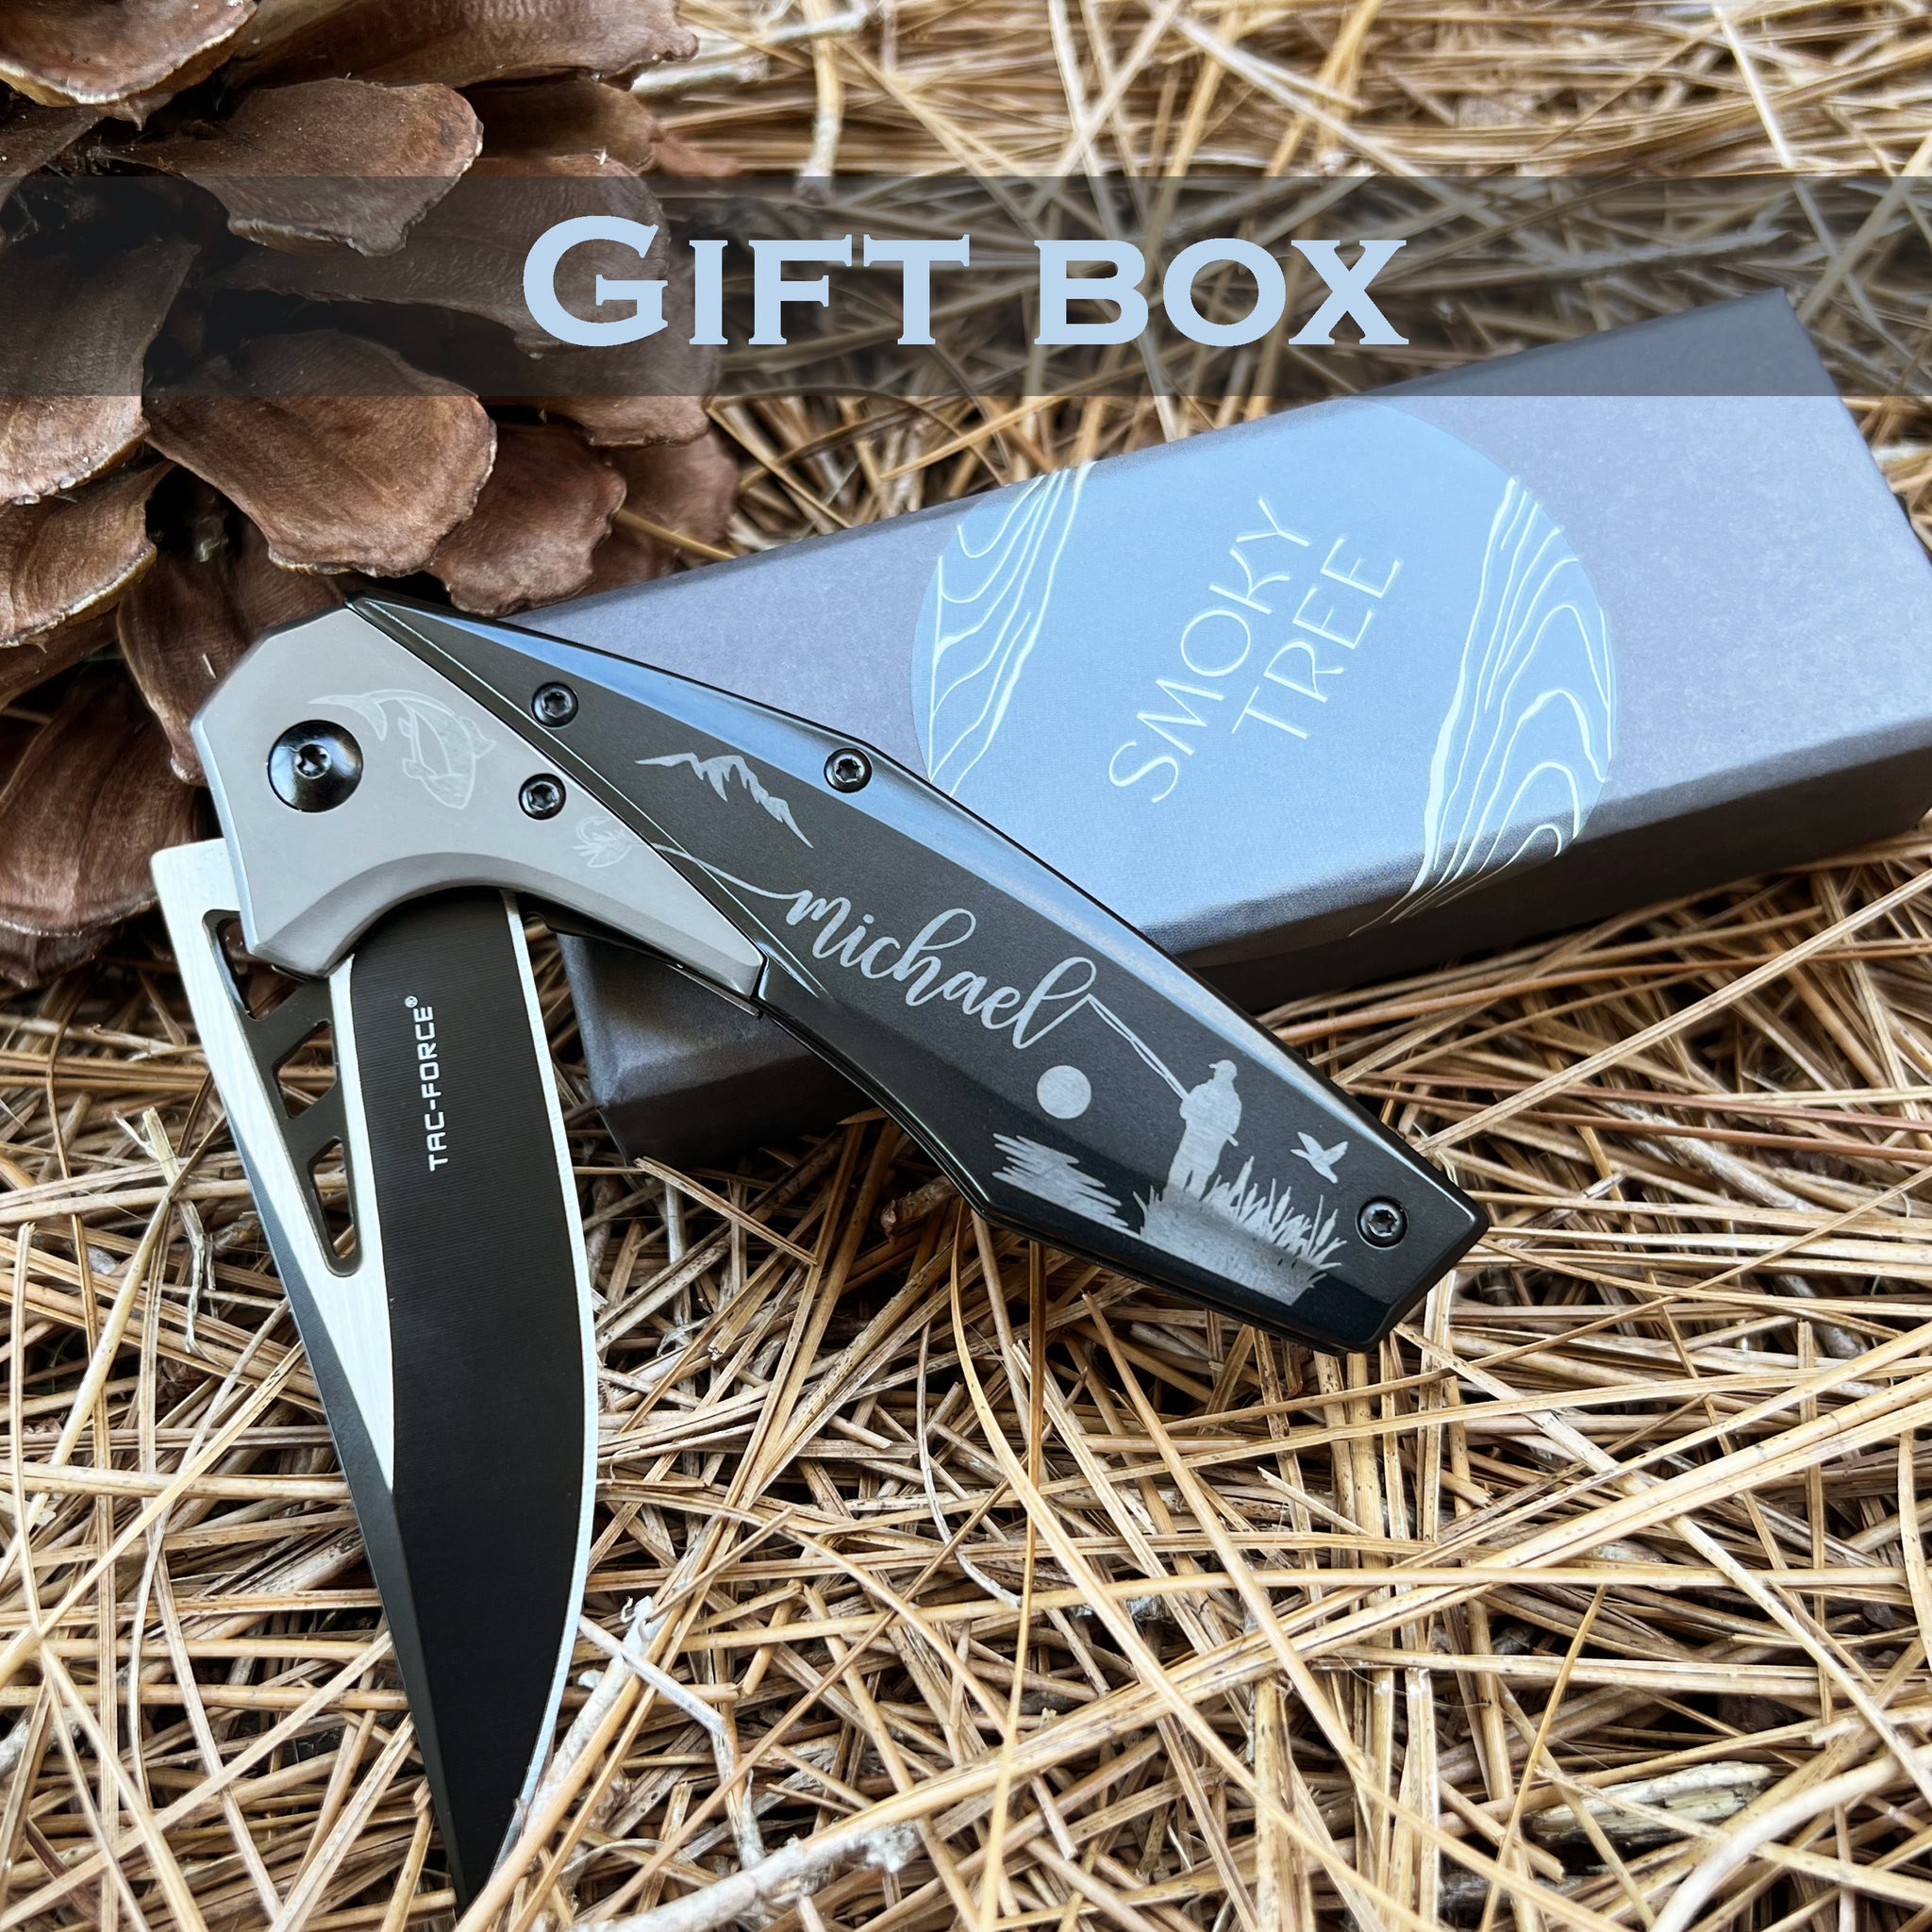 Engraved Fly Fishing Knife - Fly fishing gift - Personalized Fly